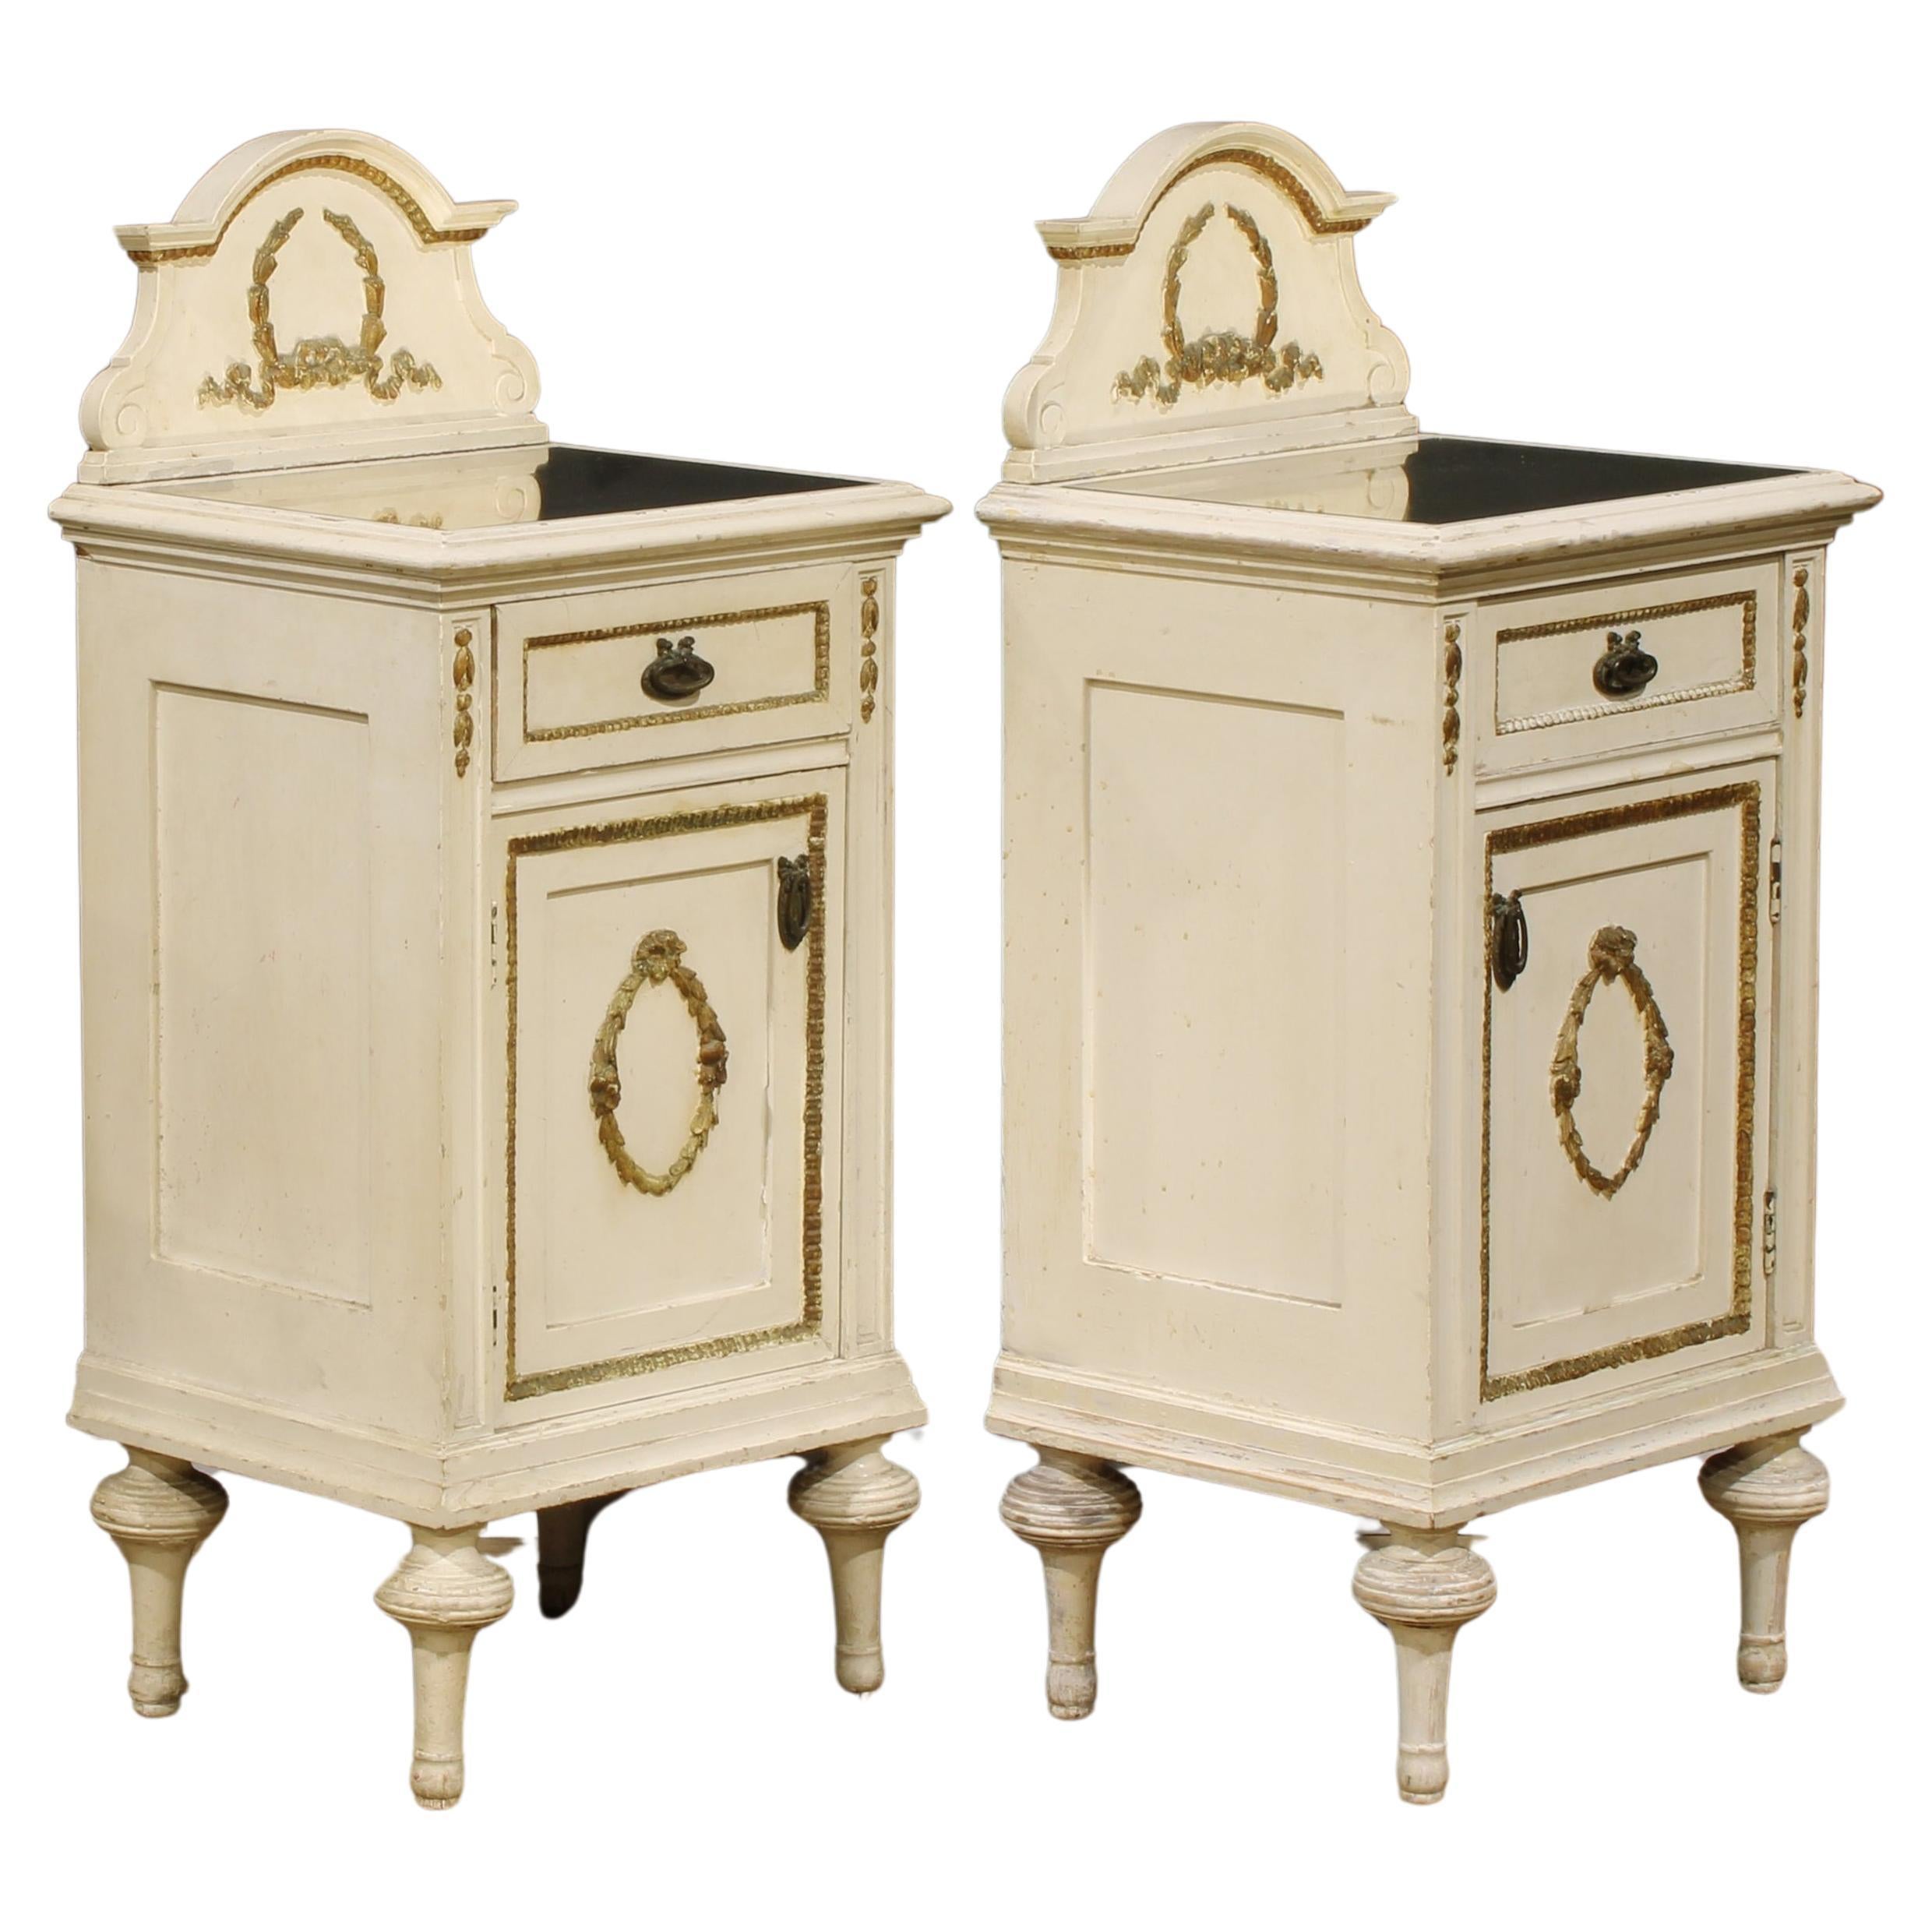 Pair of 19th Century French Louis XVI Carved Painted Nightstands Bedside Tables